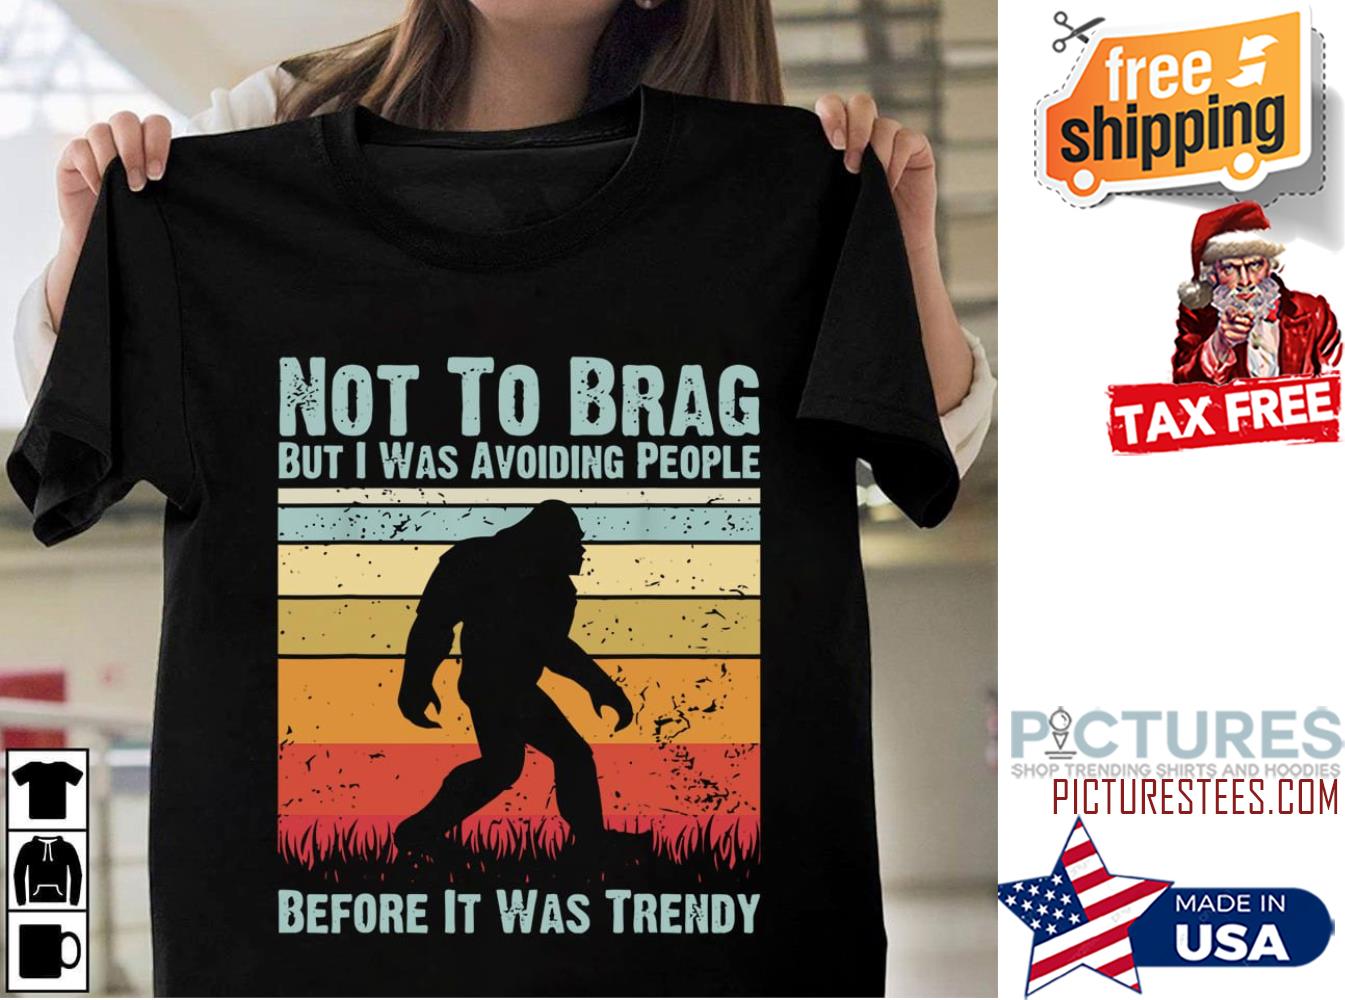 https://images.picturestees.com/2022/02/big-foot-not-to-brag-but-i-was-avoiding-people-before-it-was-trendy-vintage-shirt-picturestees-shirt.jpg